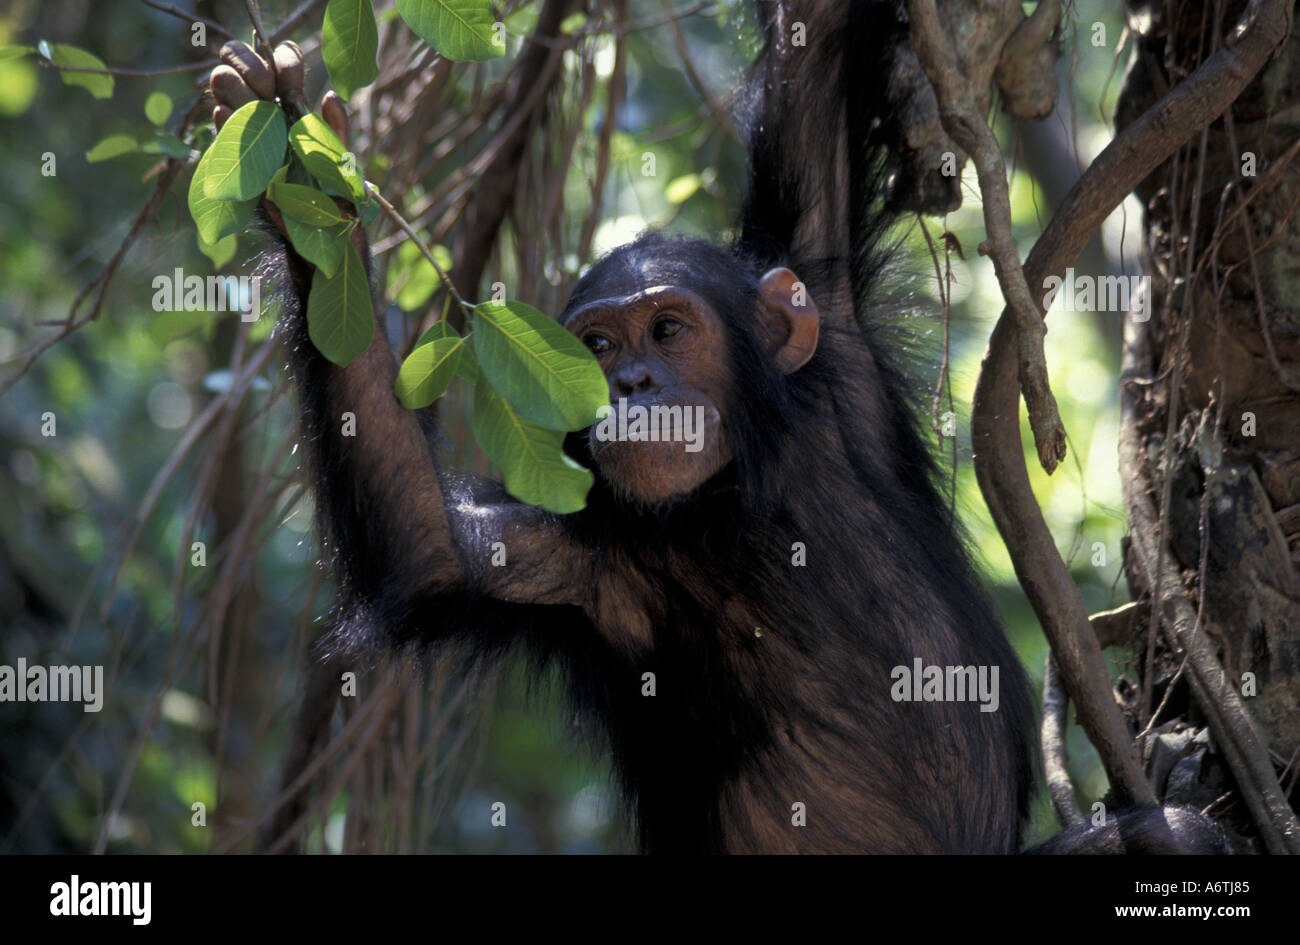 Africa, East Africa, Tanzania. Gombe National Park. Young male chimp feeding on leaves Stock Photo